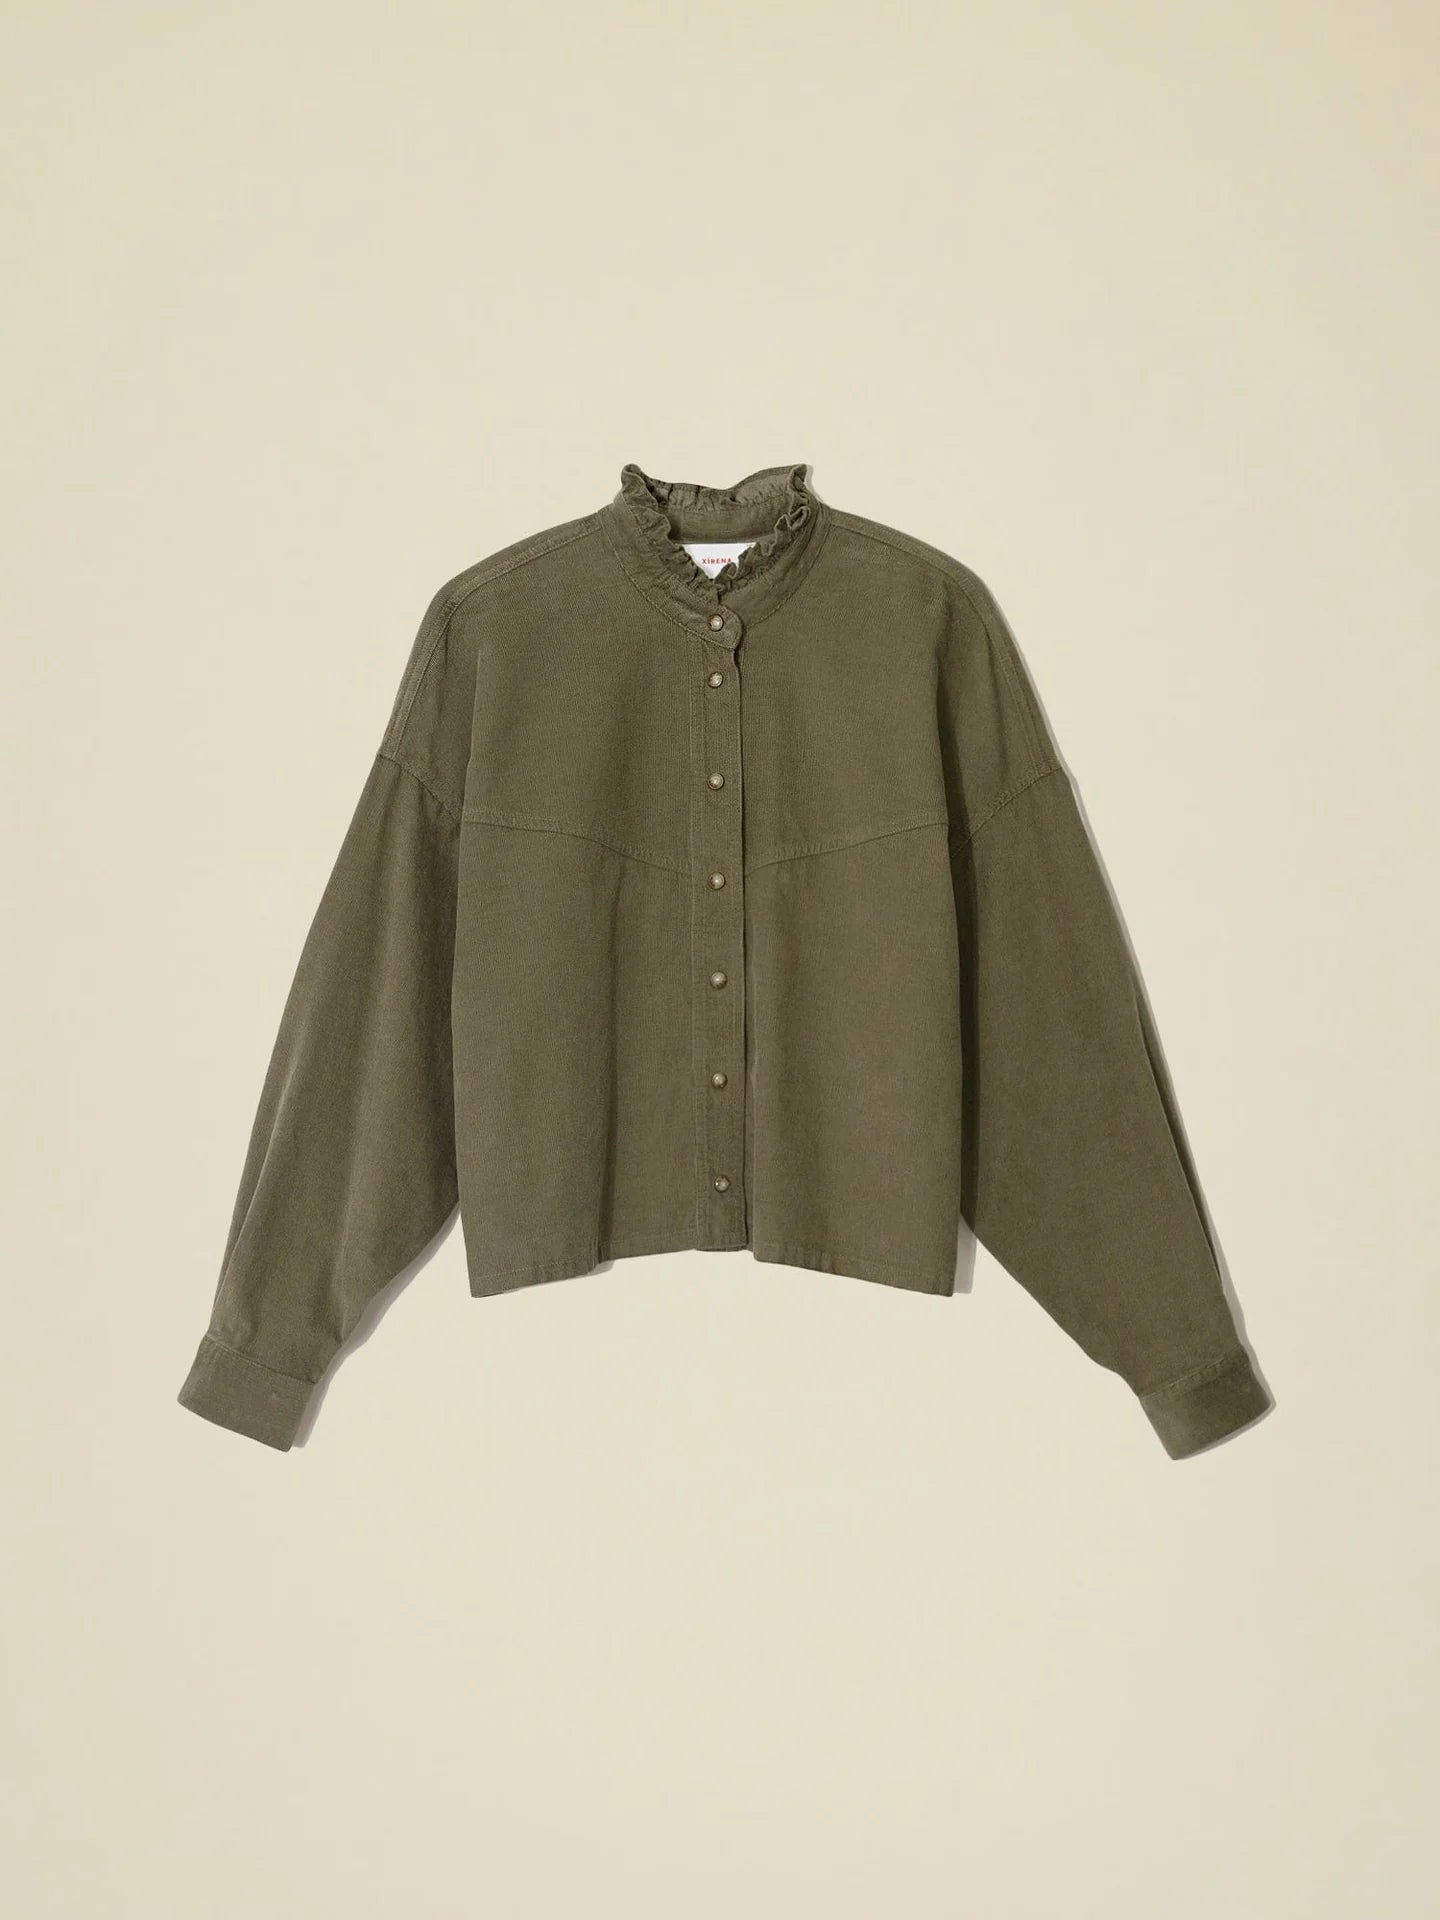 Hayes Shirt in Green Olive